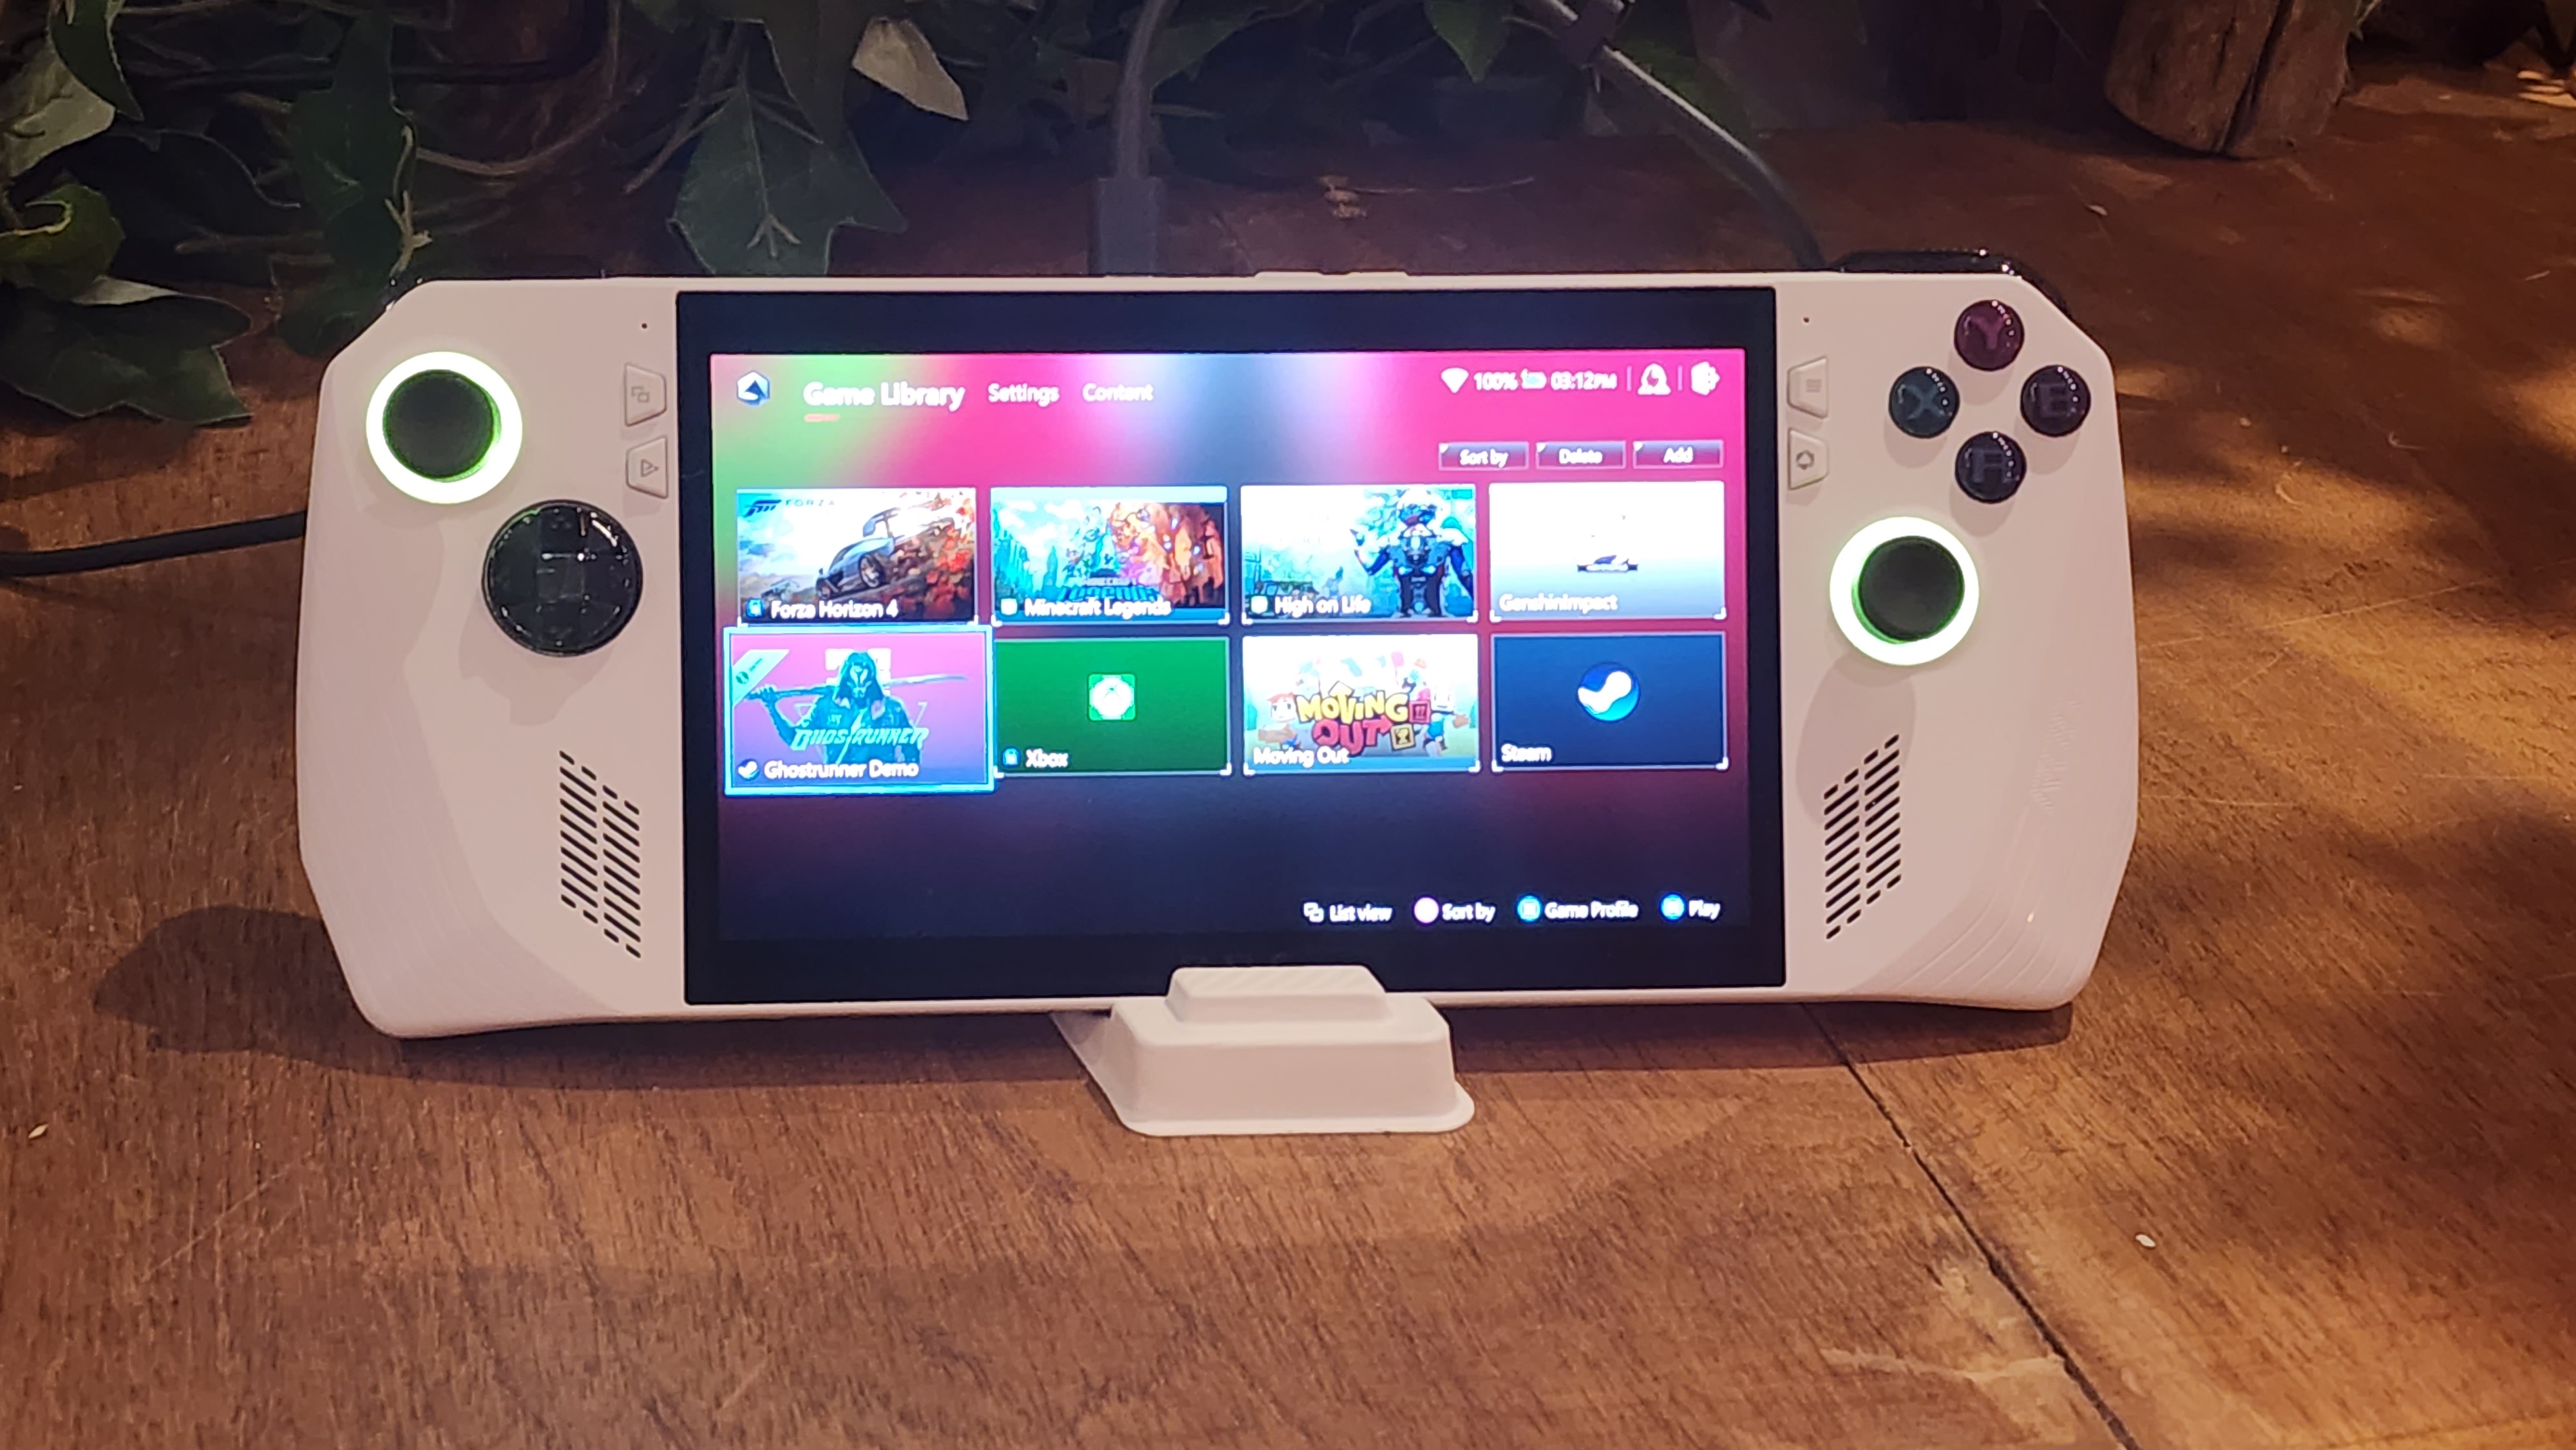 ASUS ROG Ally Hands-on: This Is Game Pass Portable - Xbox Wire